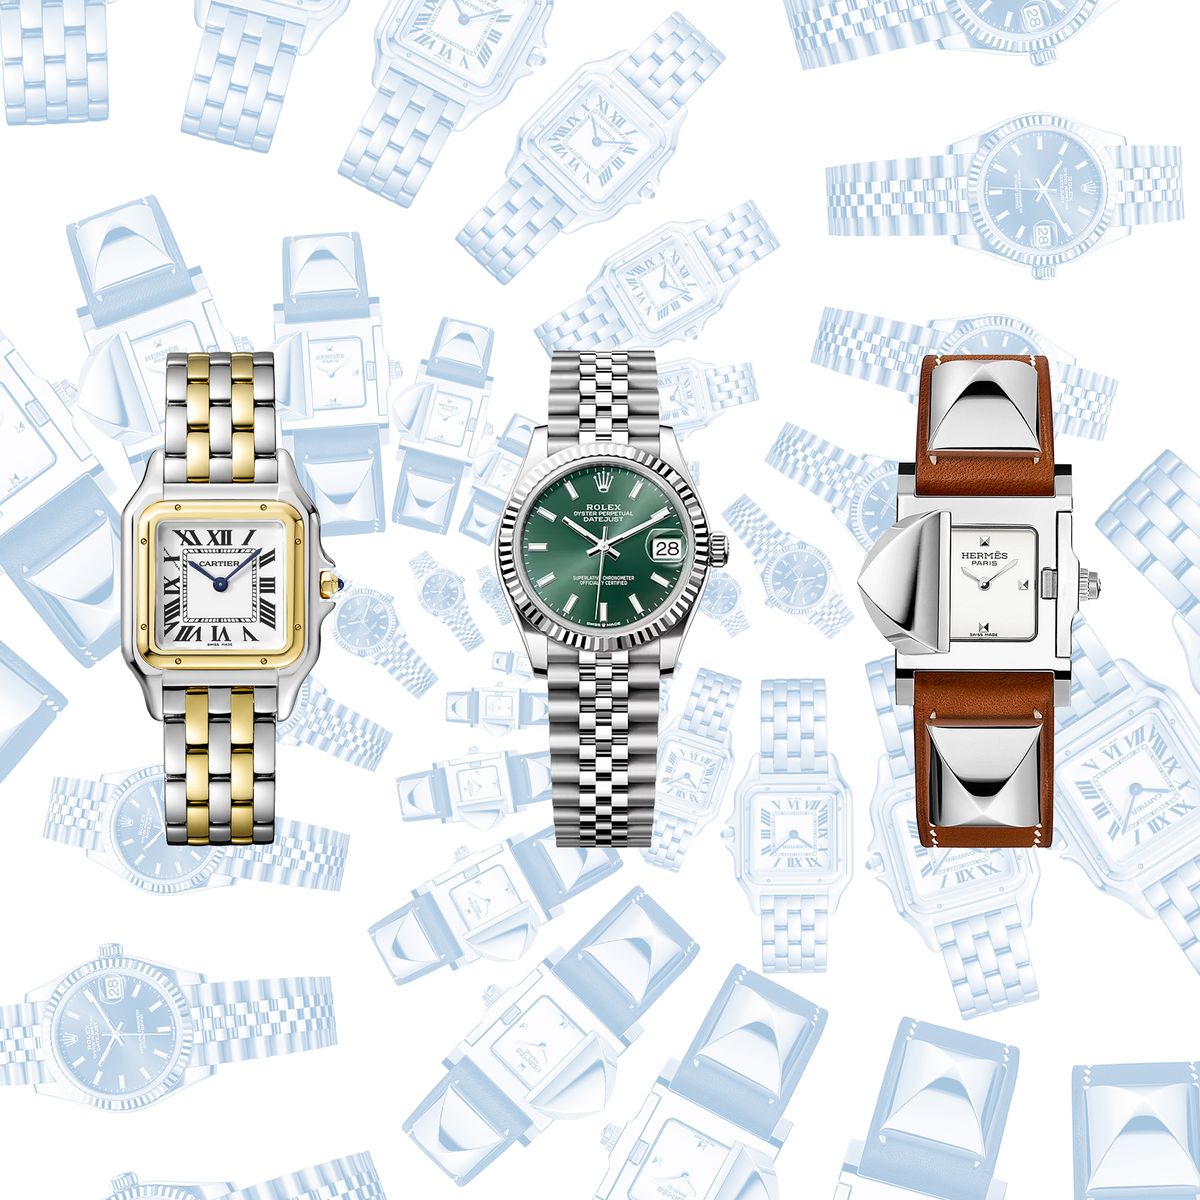 10 exquisite jewellery watches for men and women that are worth